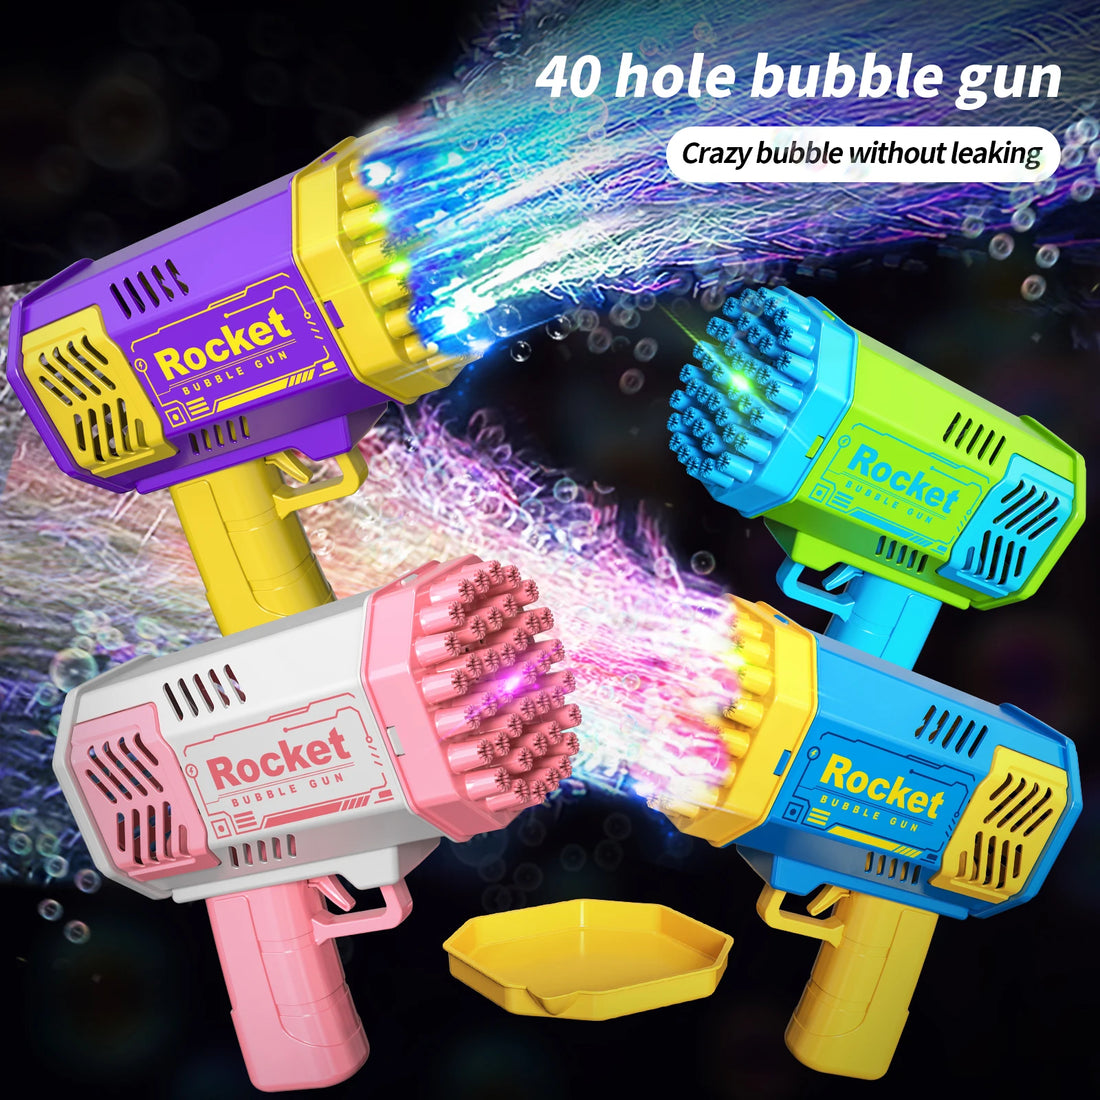 Colorful 40-hole Bubble Burster machines with Soulful Trading branding, displayed with bubbles and vibrant light effects in a dynamic advertisement.